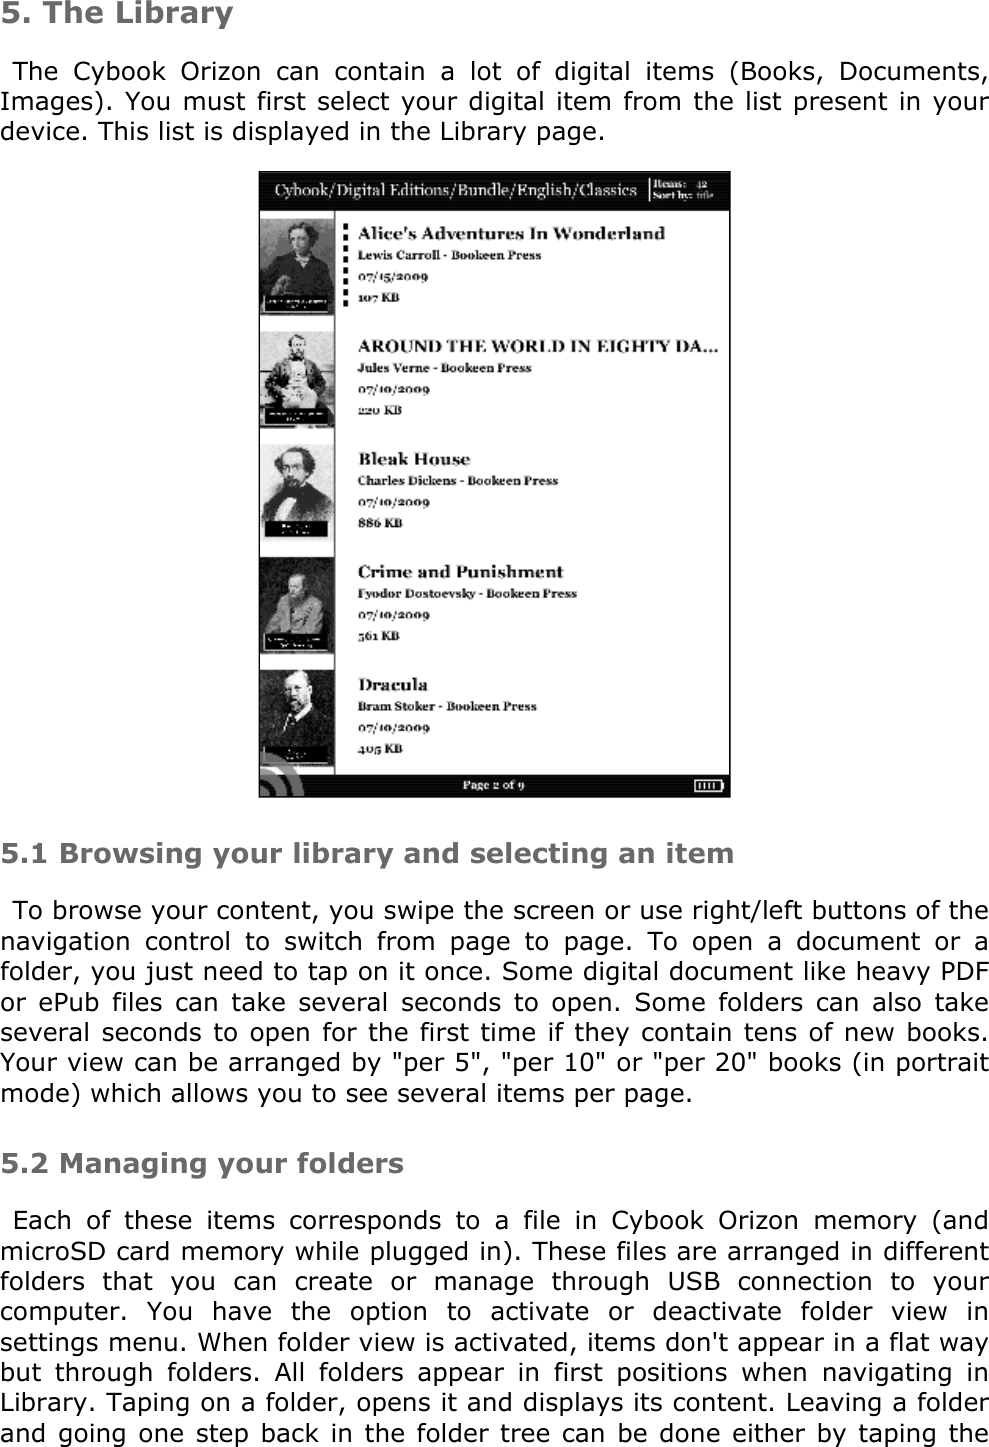 5. The LibraryThe  Cybook  Orizon  can  contain  a  lot  of  digital  items  (Books,  Documents, Images). You must first select your digital item from the list present in your device. This list is displayed in the Library page. 5.1 Browsing your library and selecting an itemTo browse your content, you swipe the screen or use right/left buttons of the navigation  control  to  switch  from  page  to  page.  To  open  a  document  or  a folder, you just need to tap on it once. Some digital document like heavy PDF or  ePub  files  can  take  several  seconds  to  open.  Some  folders  can  also  take several seconds to open for the first time if they contain tens of new books. Your view can be arranged by &quot;per 5&quot;, &quot;per 10&quot; or &quot;per 20&quot; books (in portrait mode) which allows you to see several items per page.5.2 Managing your foldersEach  of  these  items  corresponds  to  a  file  in  Cybook  Orizon  memory  (and microSD card memory while plugged in). These files are arranged in different folders  that  you  can  create  or  manage  through  USB  connection  to  your computer.  You  have  the  option  to  activate  or  deactivate  folder  view  in settings menu. When folder view is activated, items don&apos;t appear in a flat way but  through  folders.  All  folders  appear  in  first  positions  when  navigating  in Library. Taping on a folder, opens it and displays its content. Leaving a folder and going one step back  in  the folder tree can be done either by taping  the 